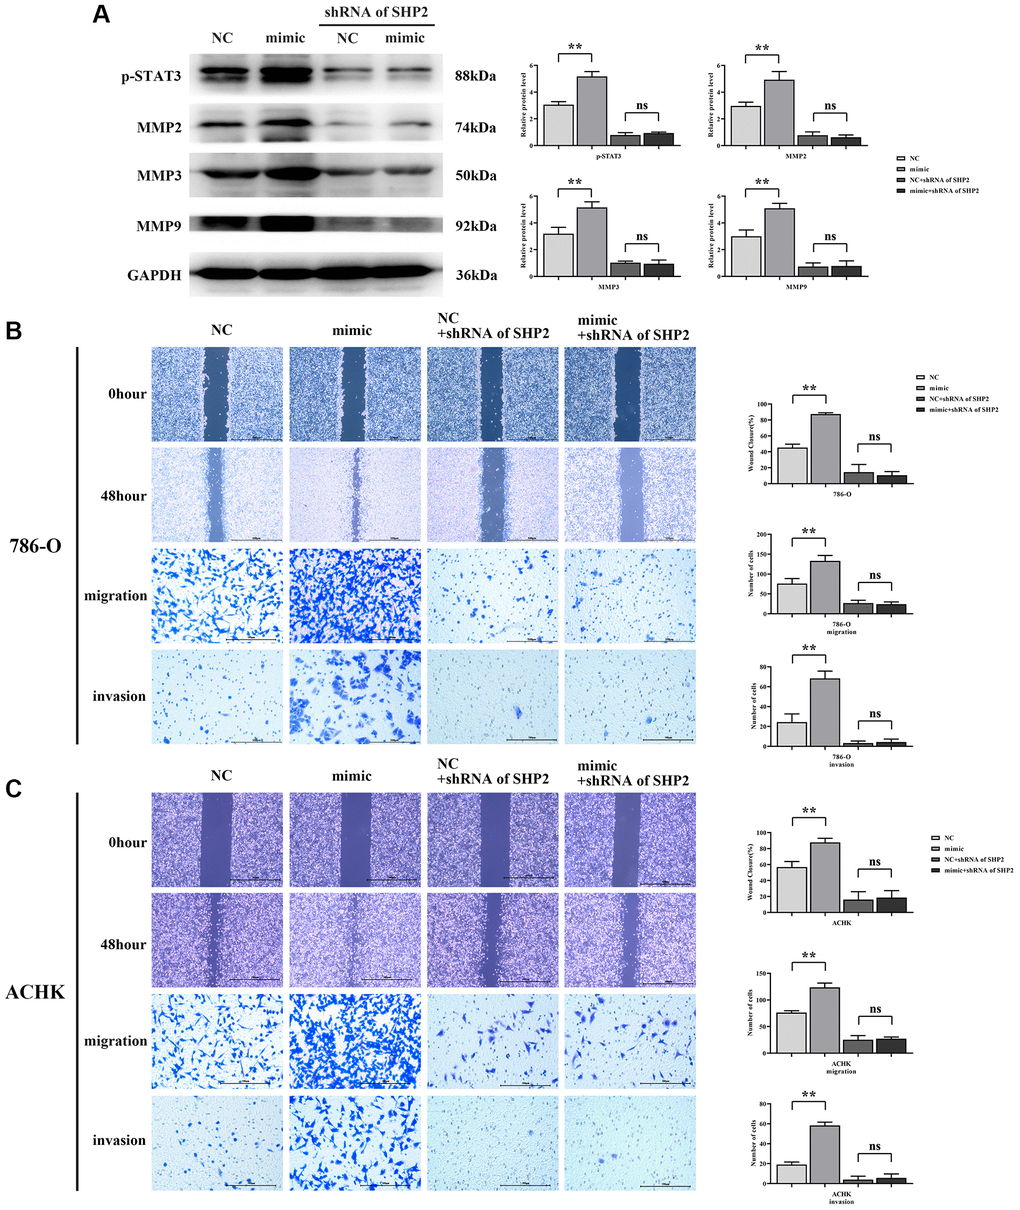 RGC32 can mediate the NF-κB/SHP2/EGFR signaling pathway and promote the migration and invasion of ccRCC cells. (A) Protein band plots of p-STAT3, MMP2, MMP3 and MMP9 and relative protein expression statistics; (B) Wound healing results of 786-O cells at 0 h and 48 h and transwell assay; (C) Wound healing results of ACHN cells at 0 h and 48 h and transwell assay. **p nsp > 0.05.